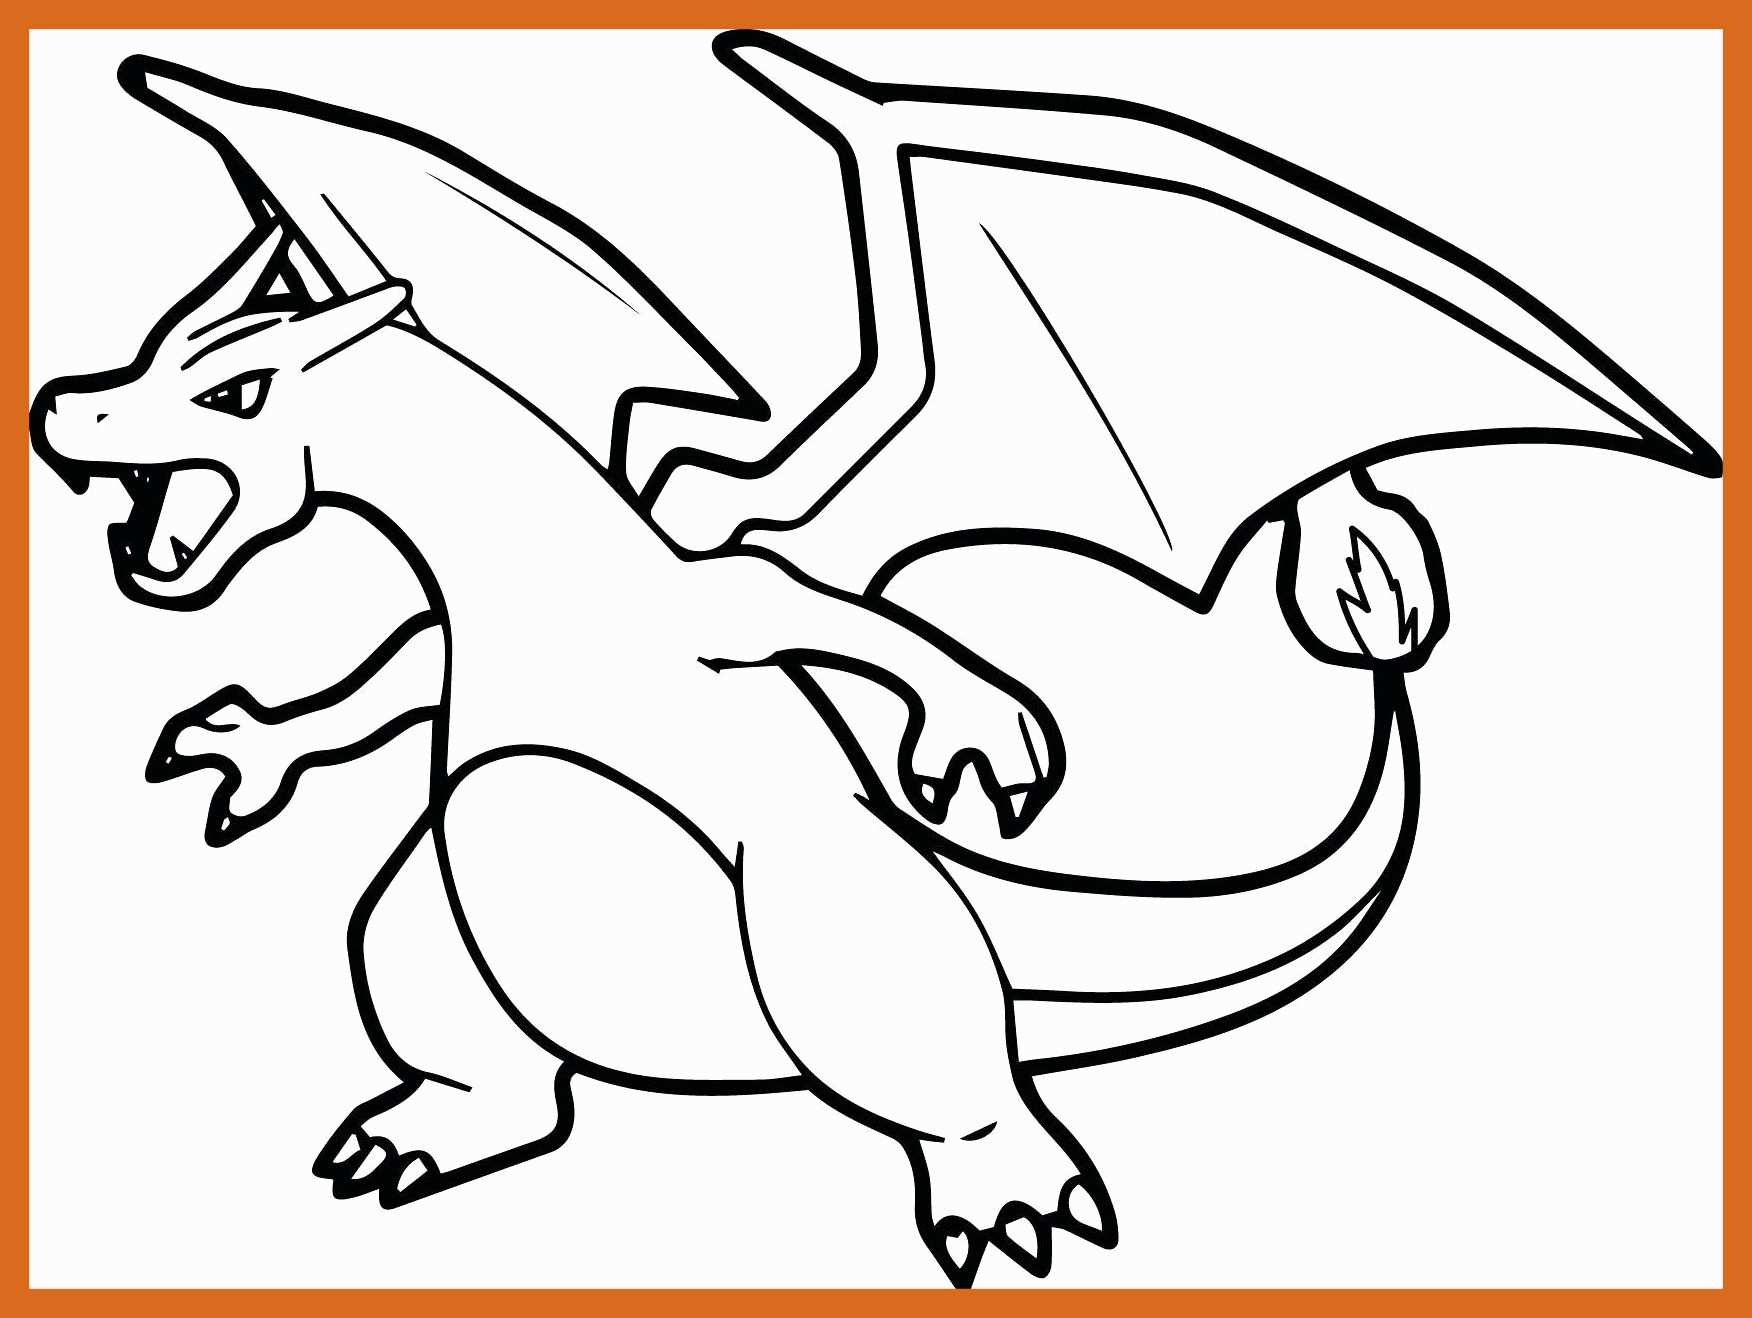 Charizard Coloring Pages Mega Charizard X Coloring Page Best Of Pokemon Coloring Pages